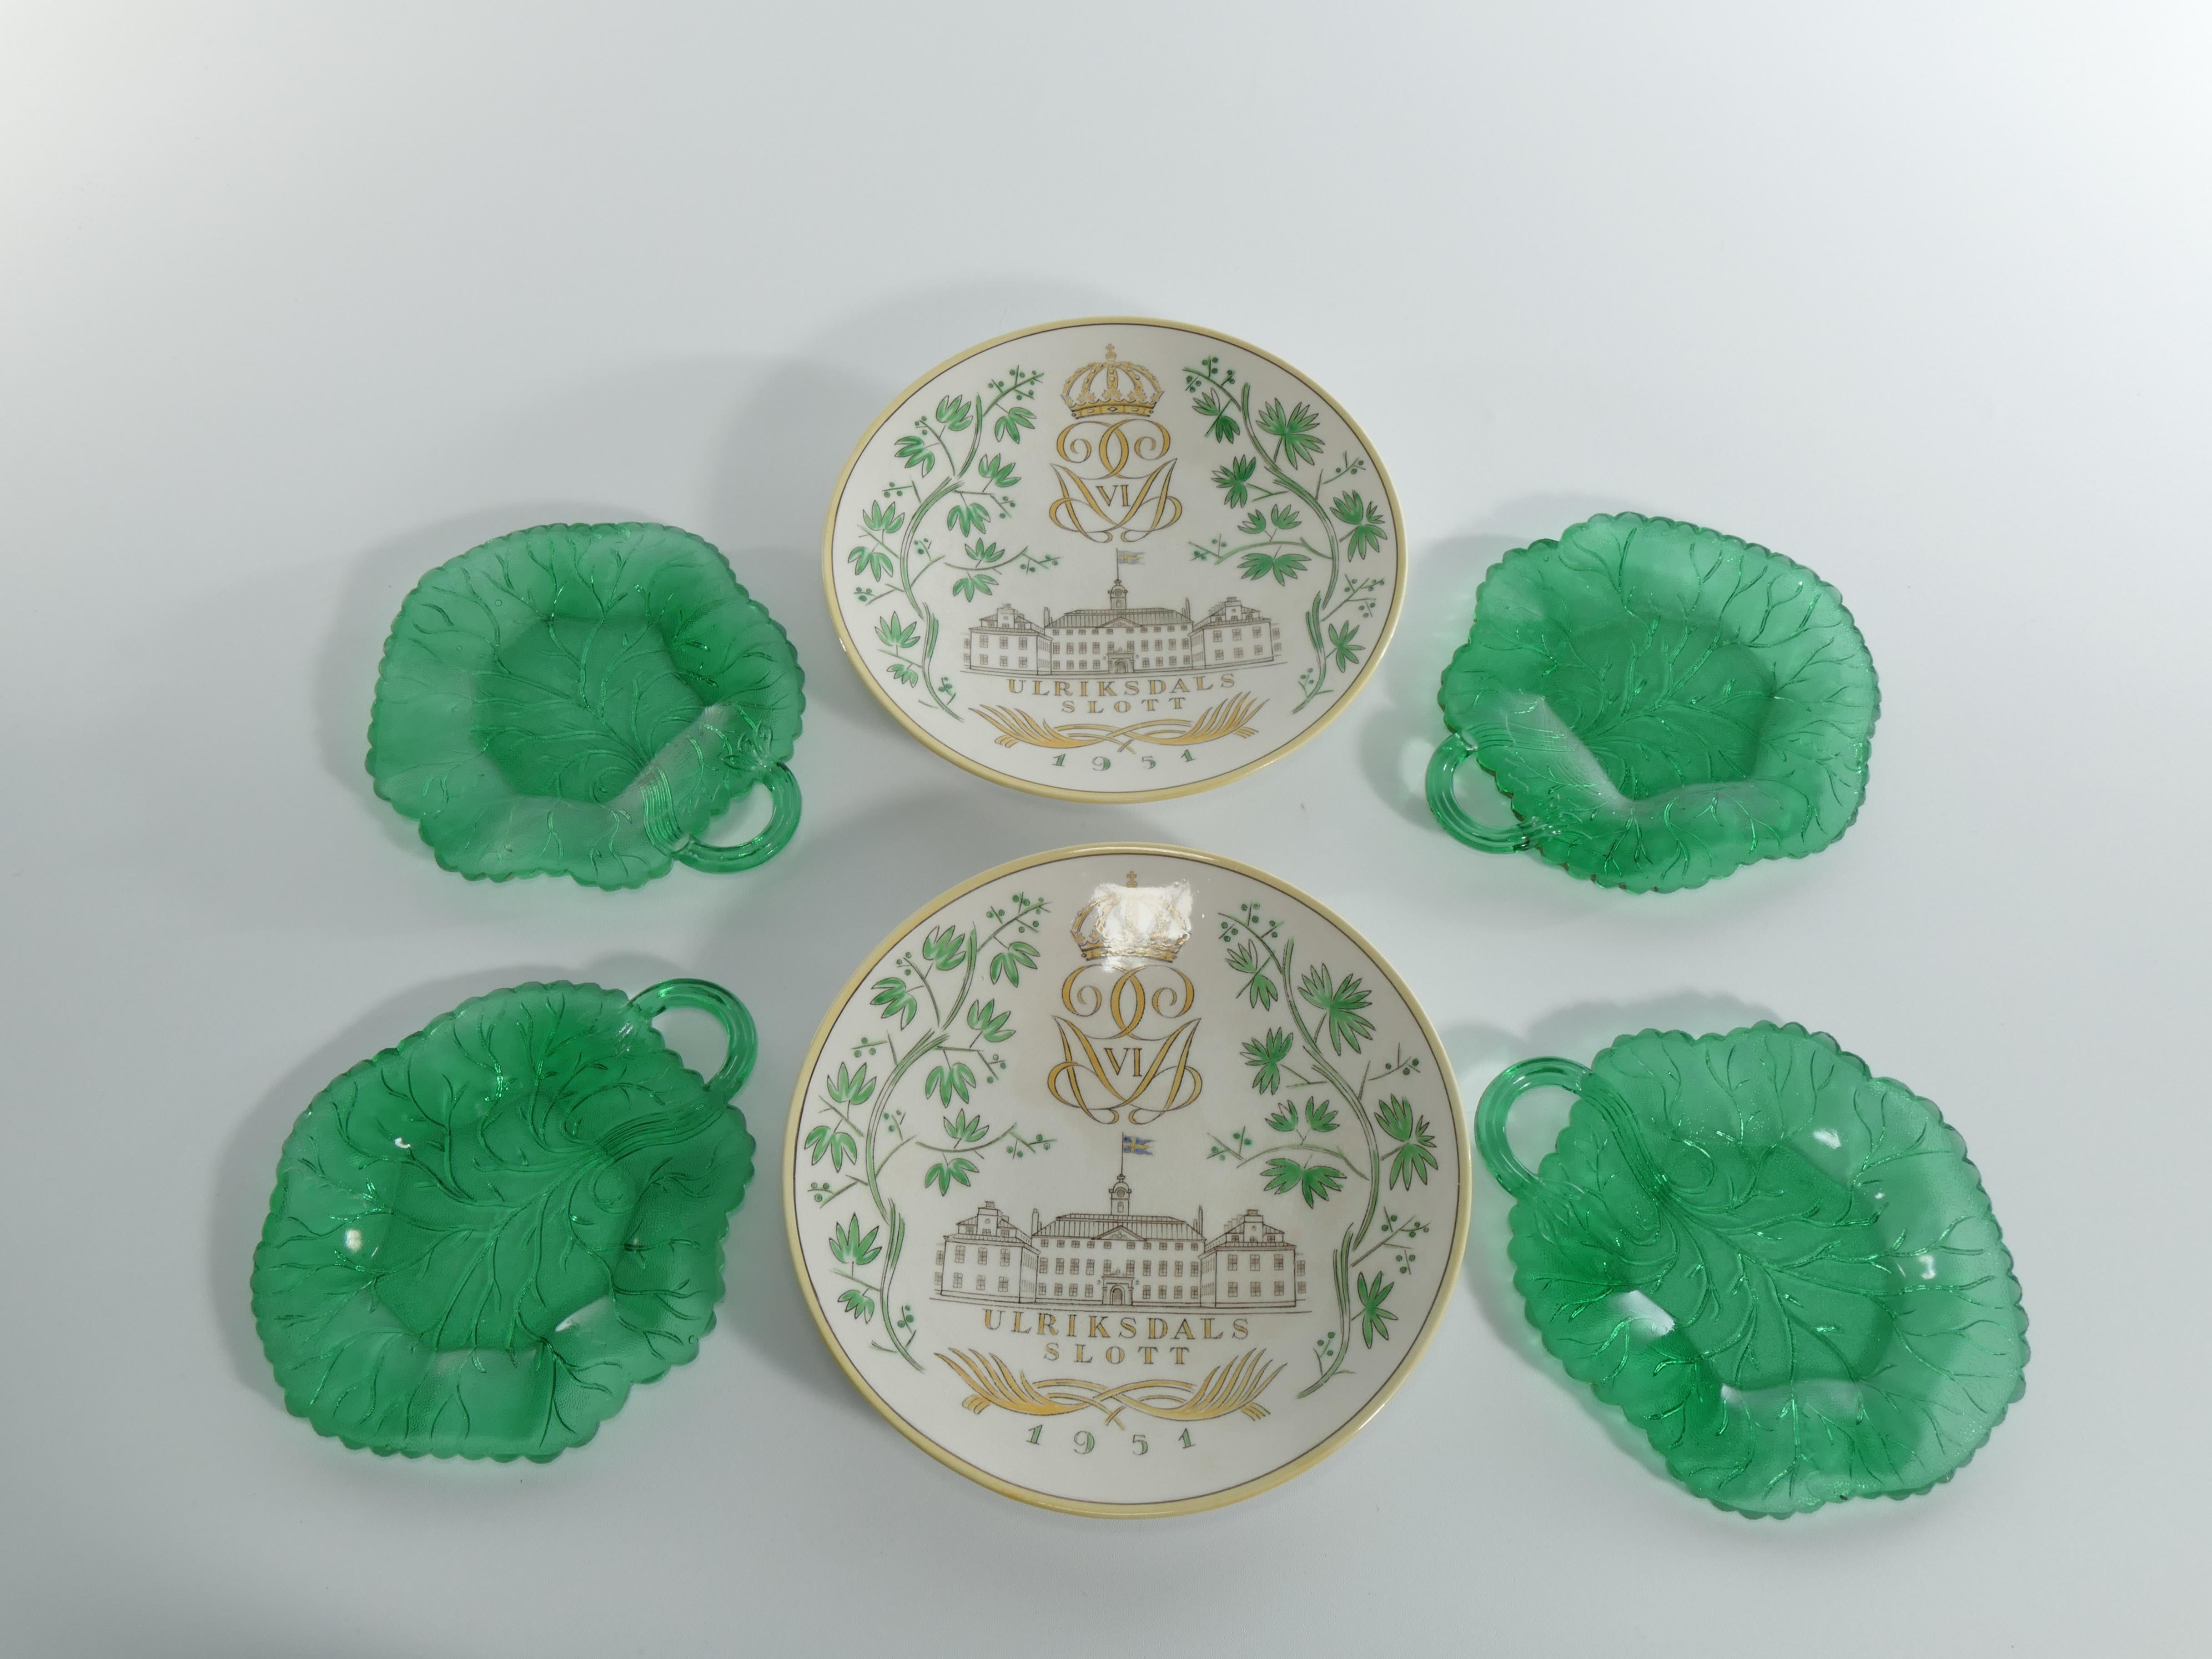 Pressed Aesthetic Movement Emerald Green Glass Leaf Plates For Sale